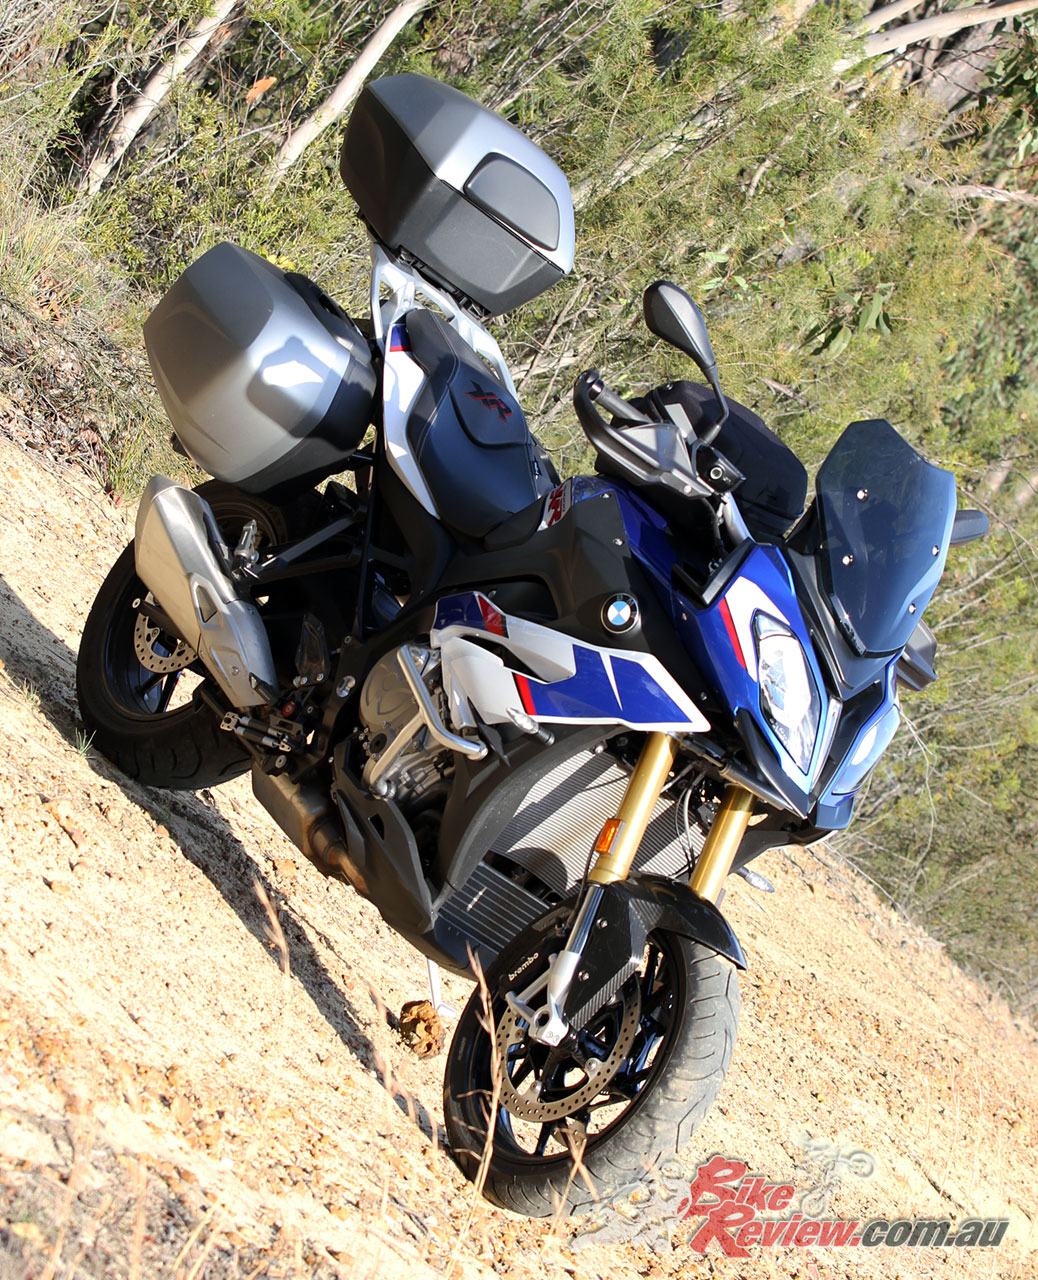 The S 1000 XR features the famous BMW 999cc in-line four-cylinder, tuned for low to mid-range grunt.